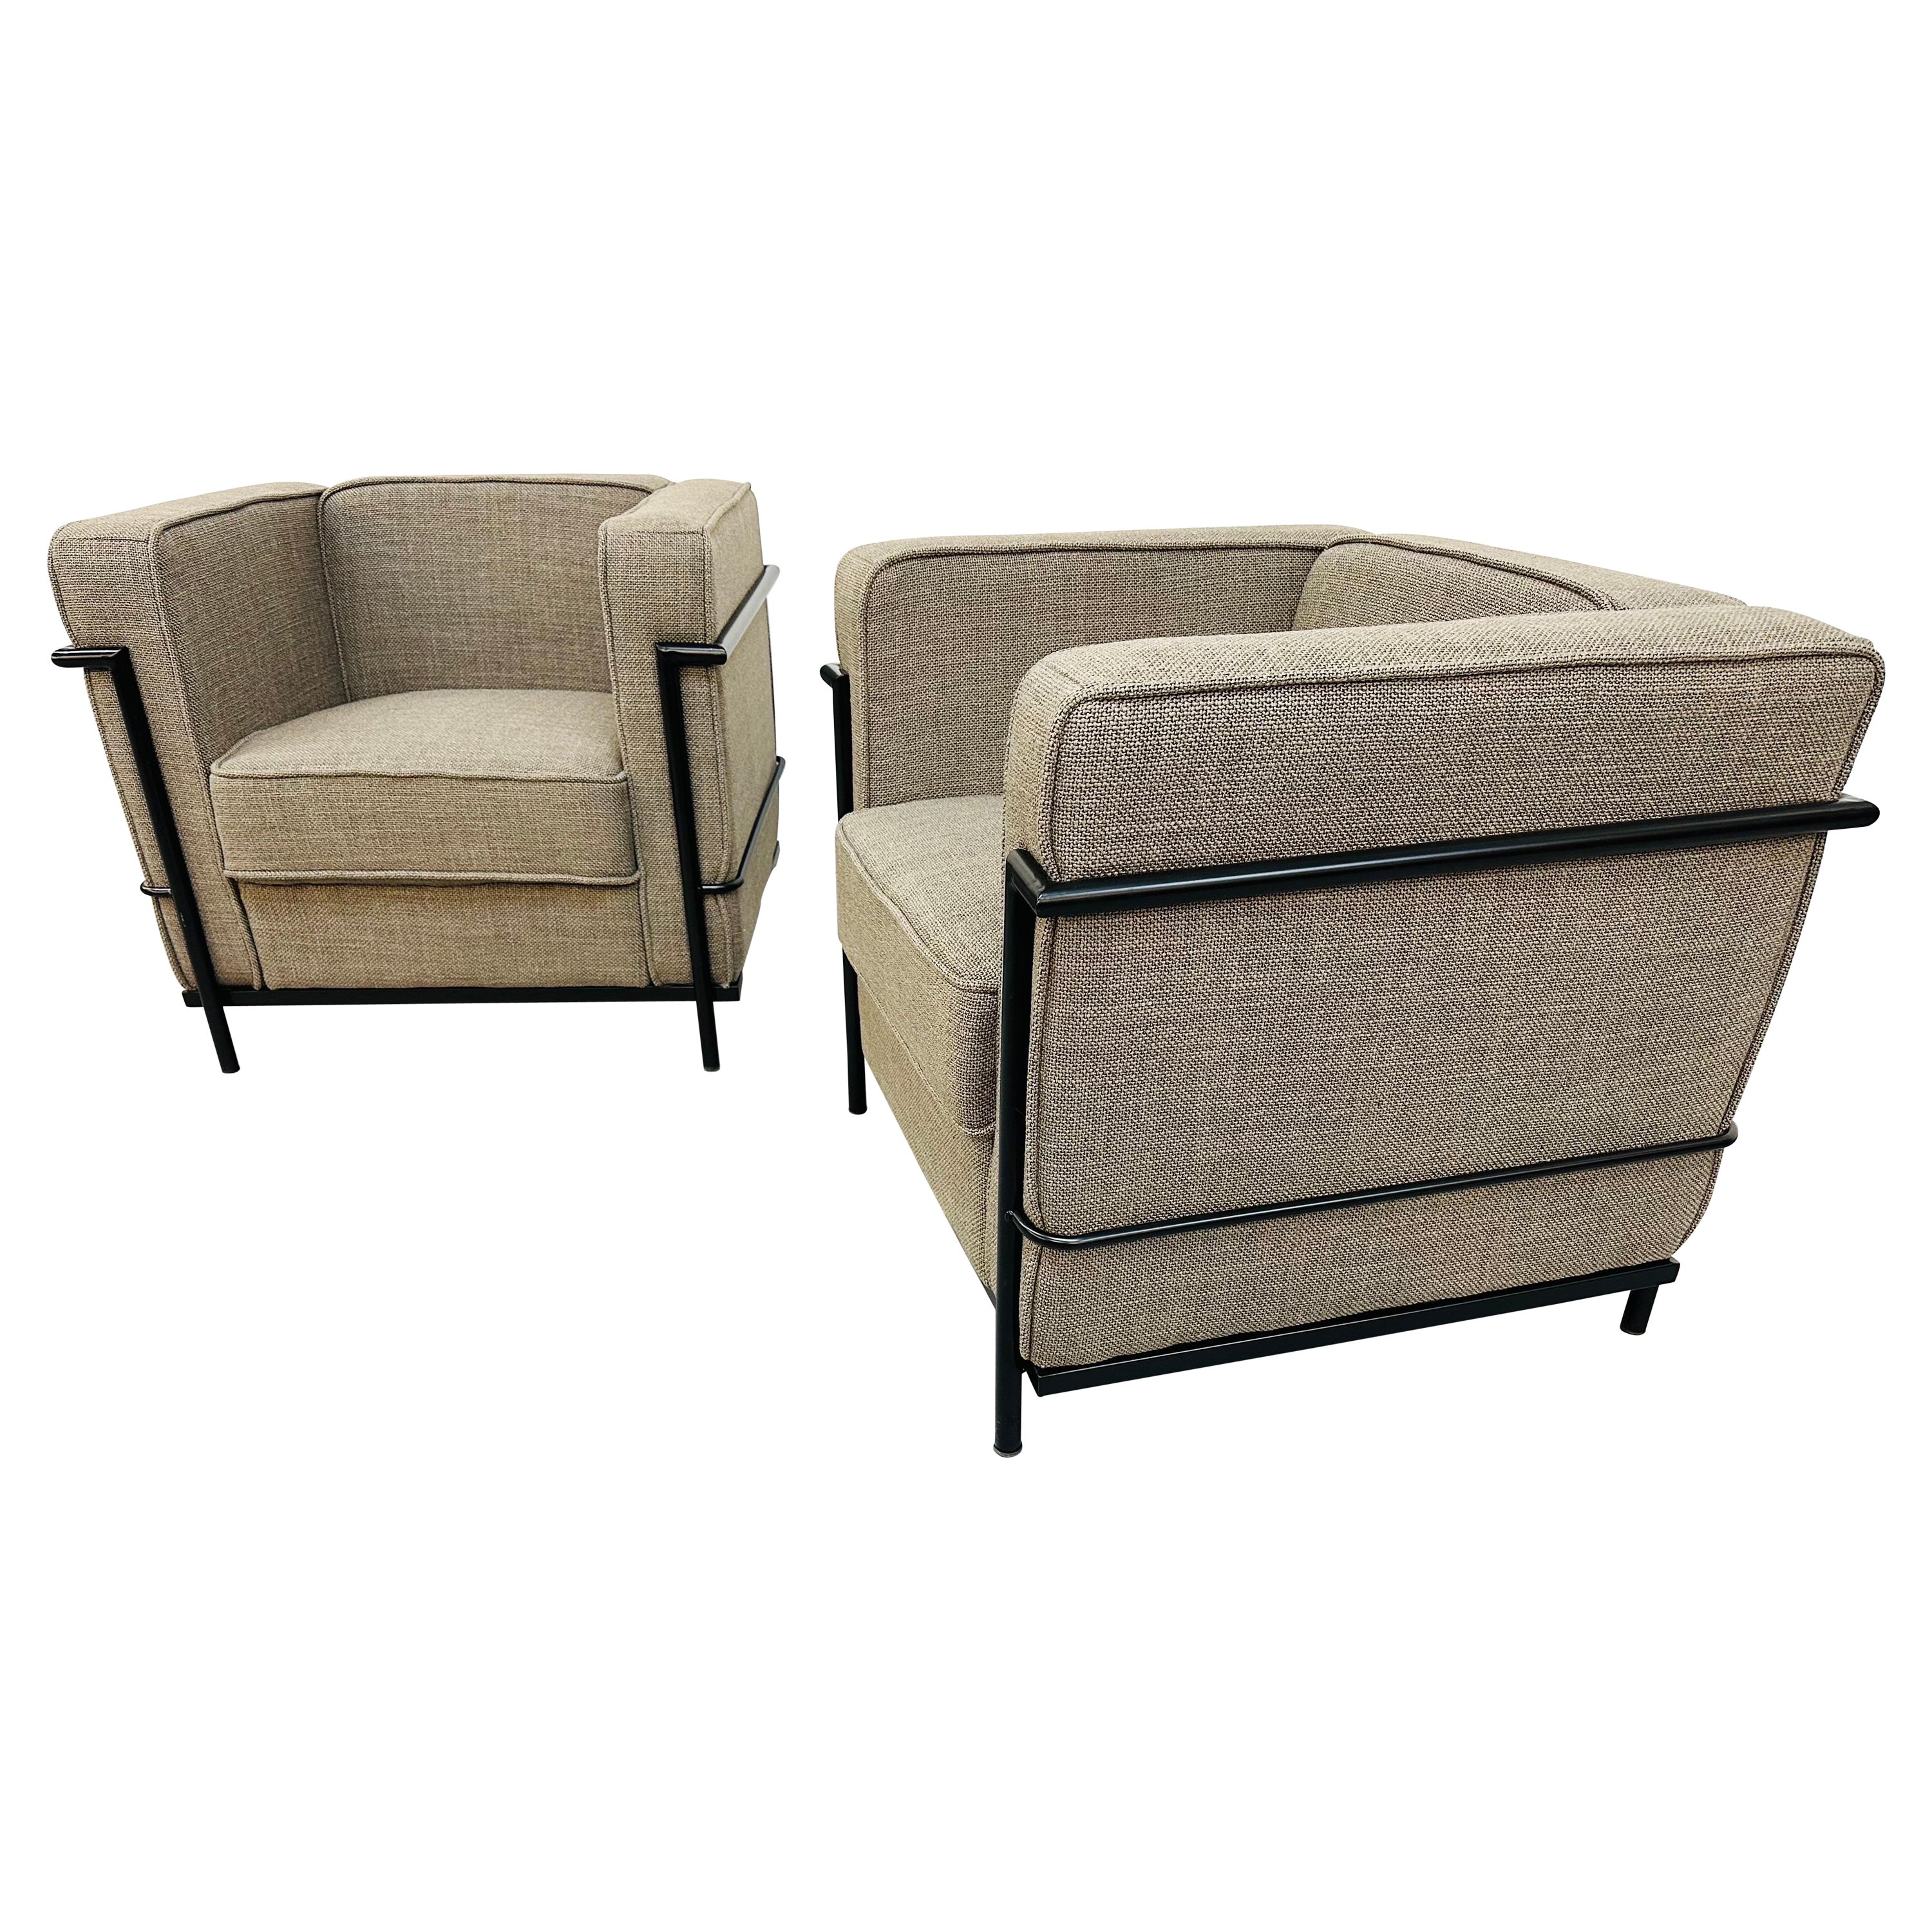 Modern Le Corbusier Style Club Chairs, Set of 2 For Sale